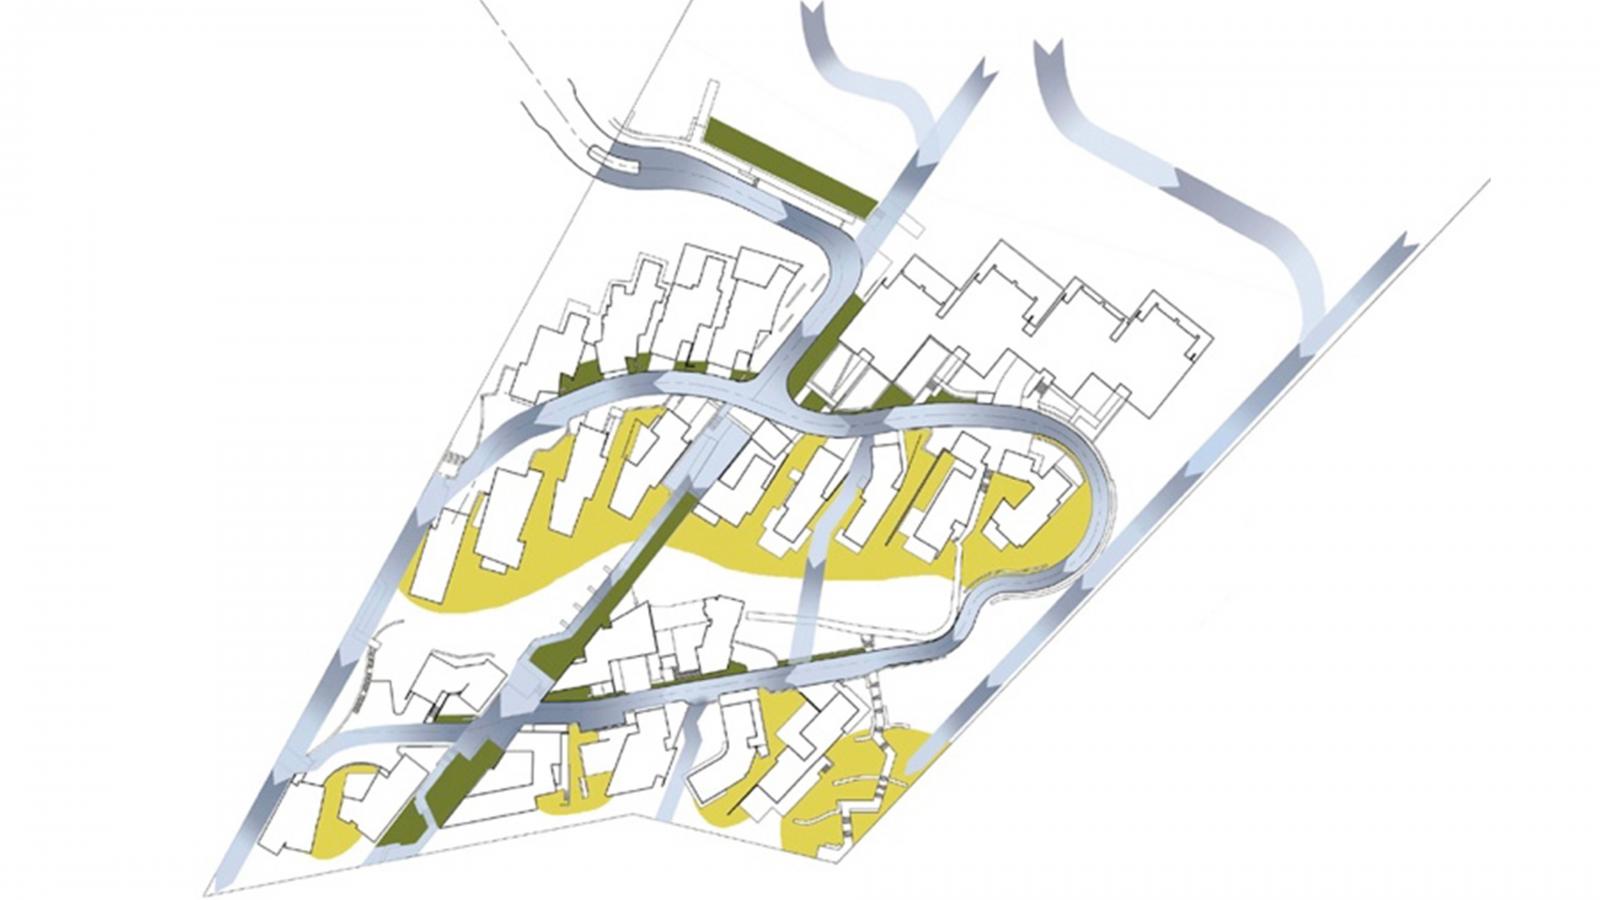 A diagram of the architectural site plan for Spring Cove in Manly displays a residential layout with multiple buildings, curving roads, designated green spaces, and pathways. Blue lines appear to represent water features or boundaries, while yellow areas denote open spaces or parks.